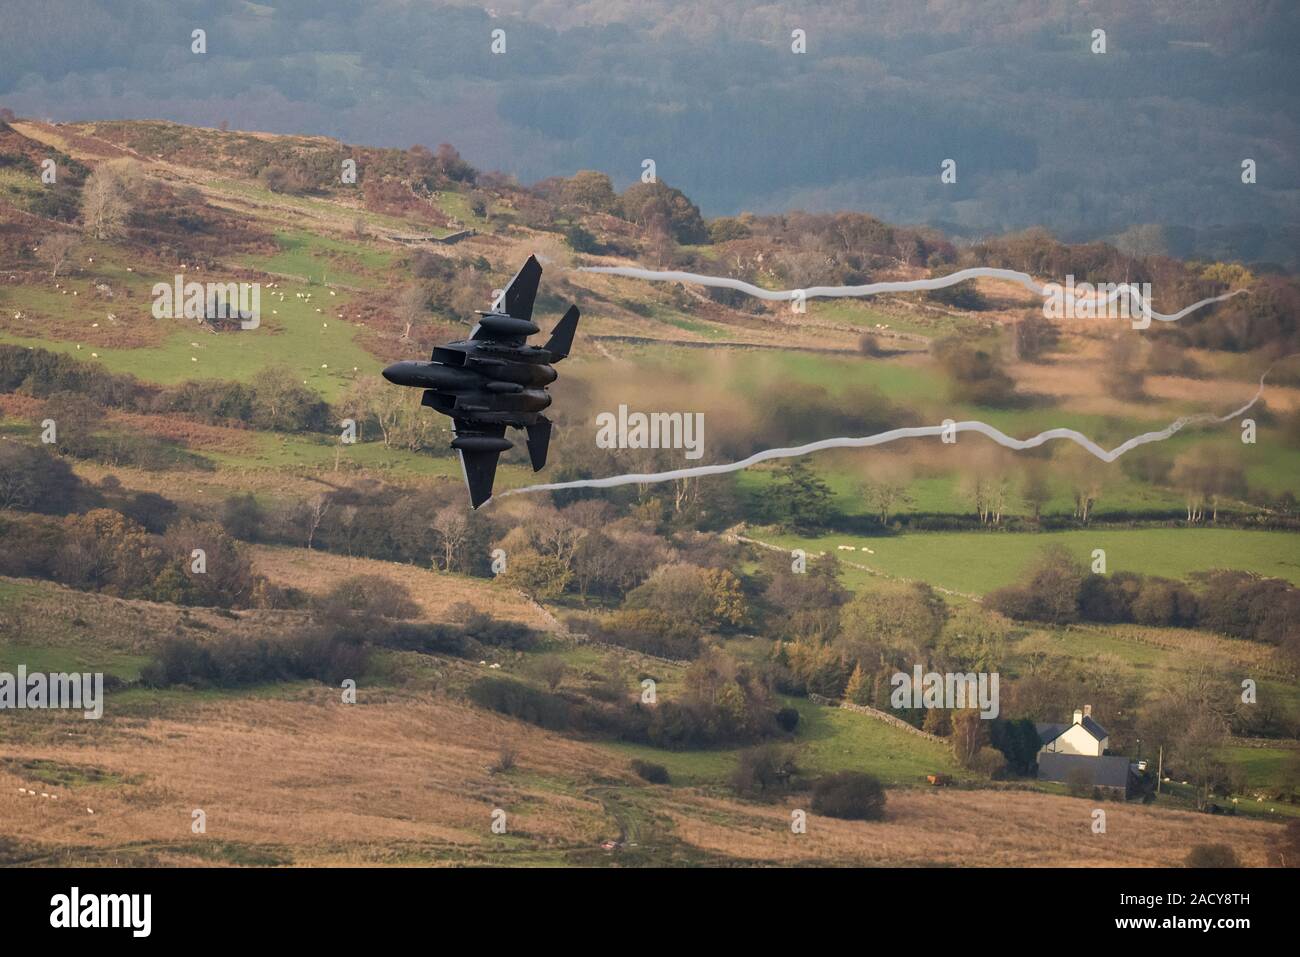 F-15 Eagle, USAF Mc Donnell Douglas low-level fighter jet flying from Valley Anglesey through the Mach Loop in Cadair Idris Wales Stock Photo